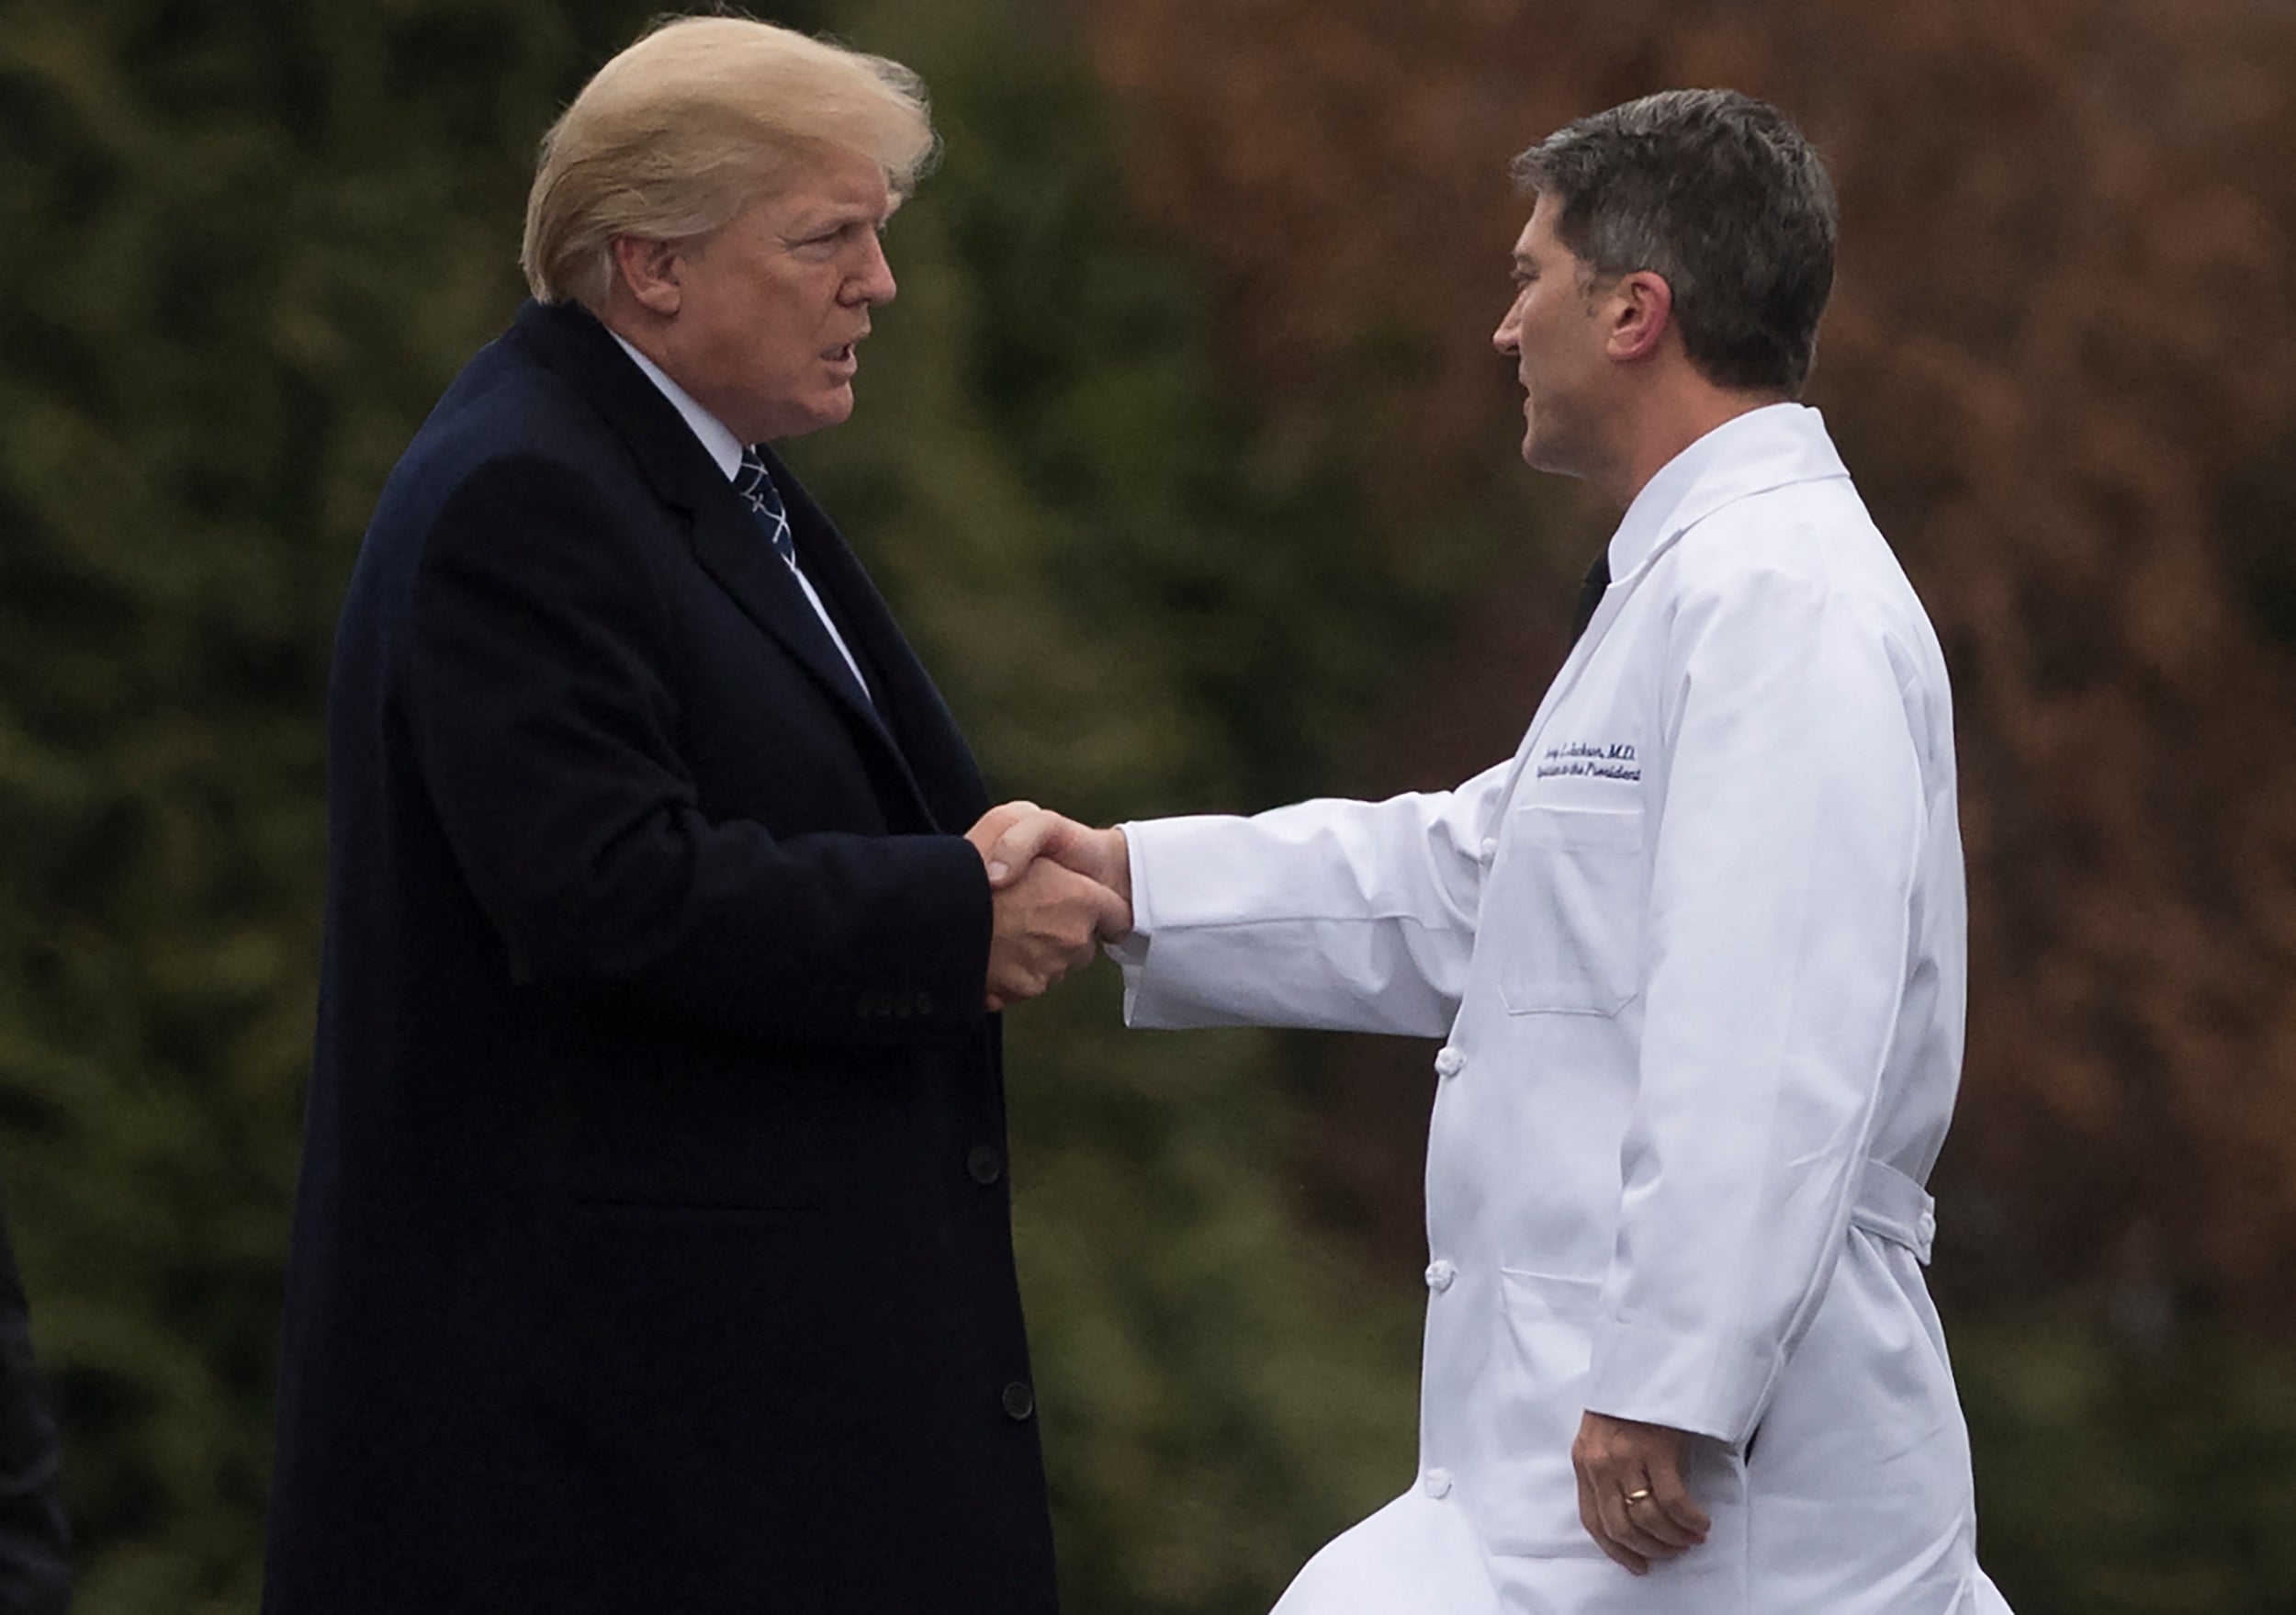 Donald Trump (left) shakes hands with Ronny Jackson (right) in 2018.